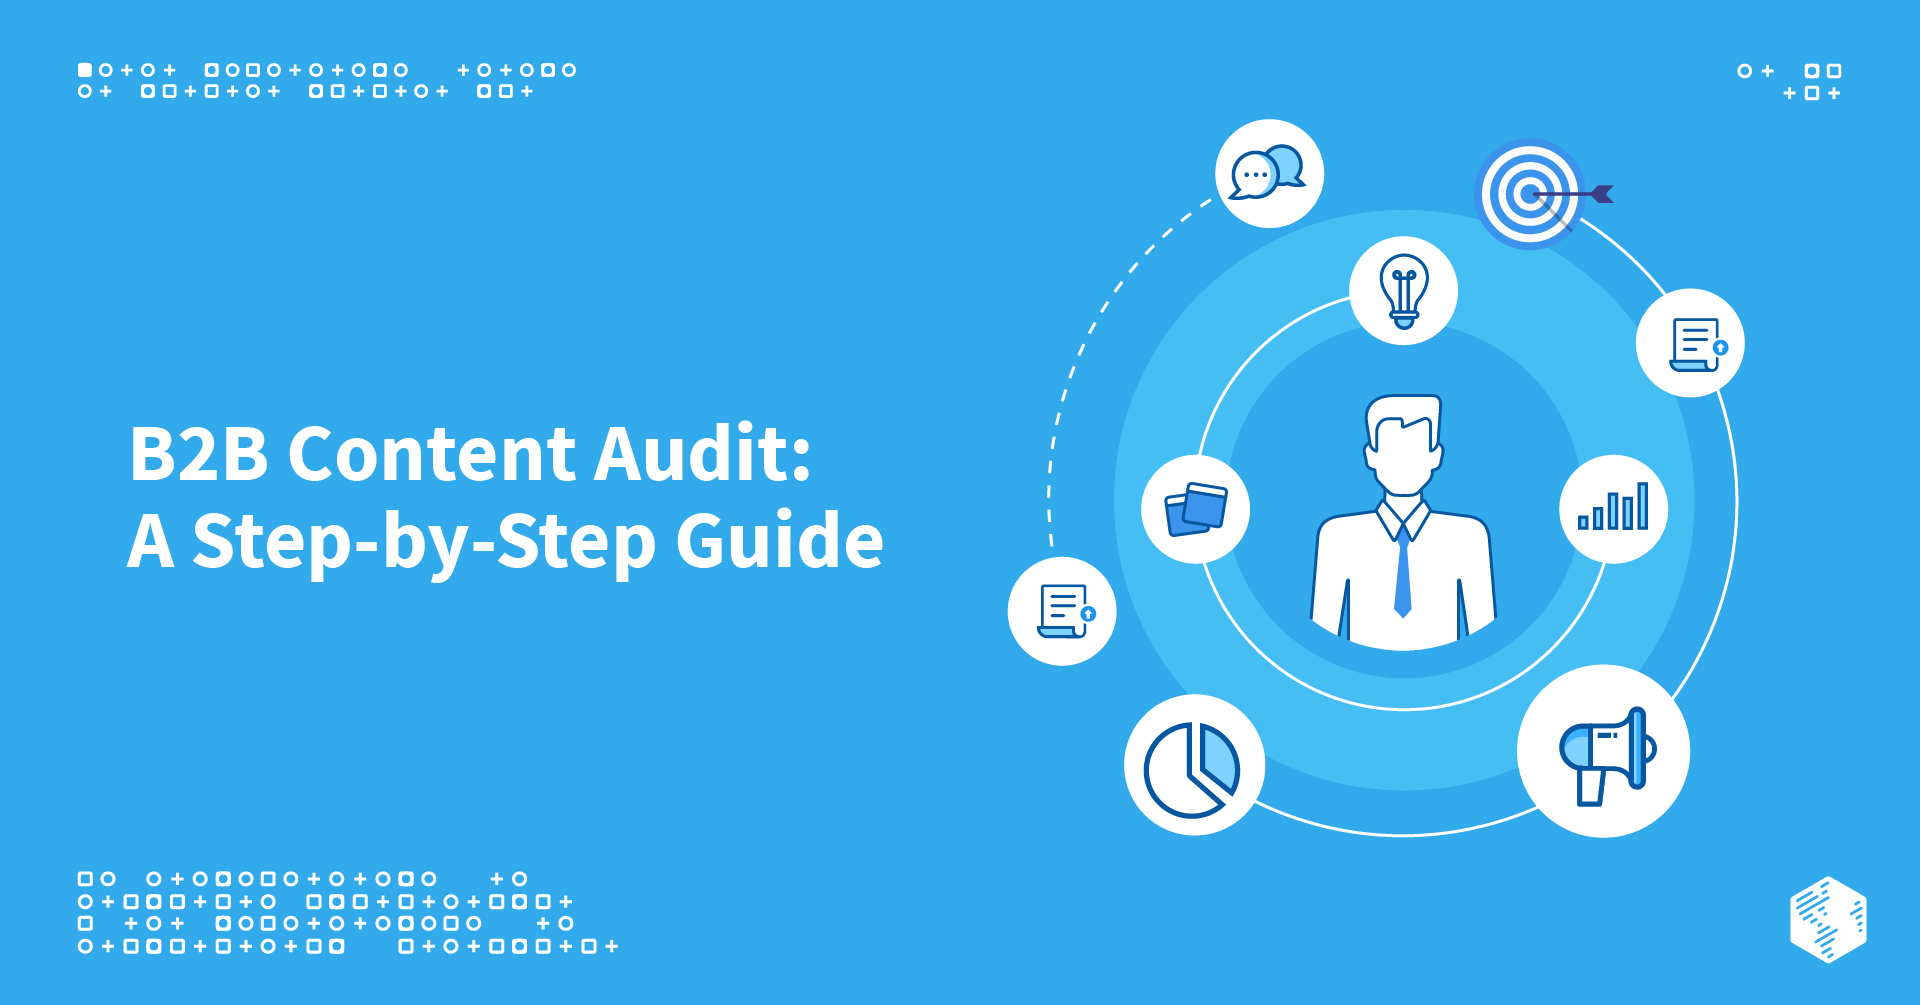 B2B Content Audit: A Step-by-Step Guide